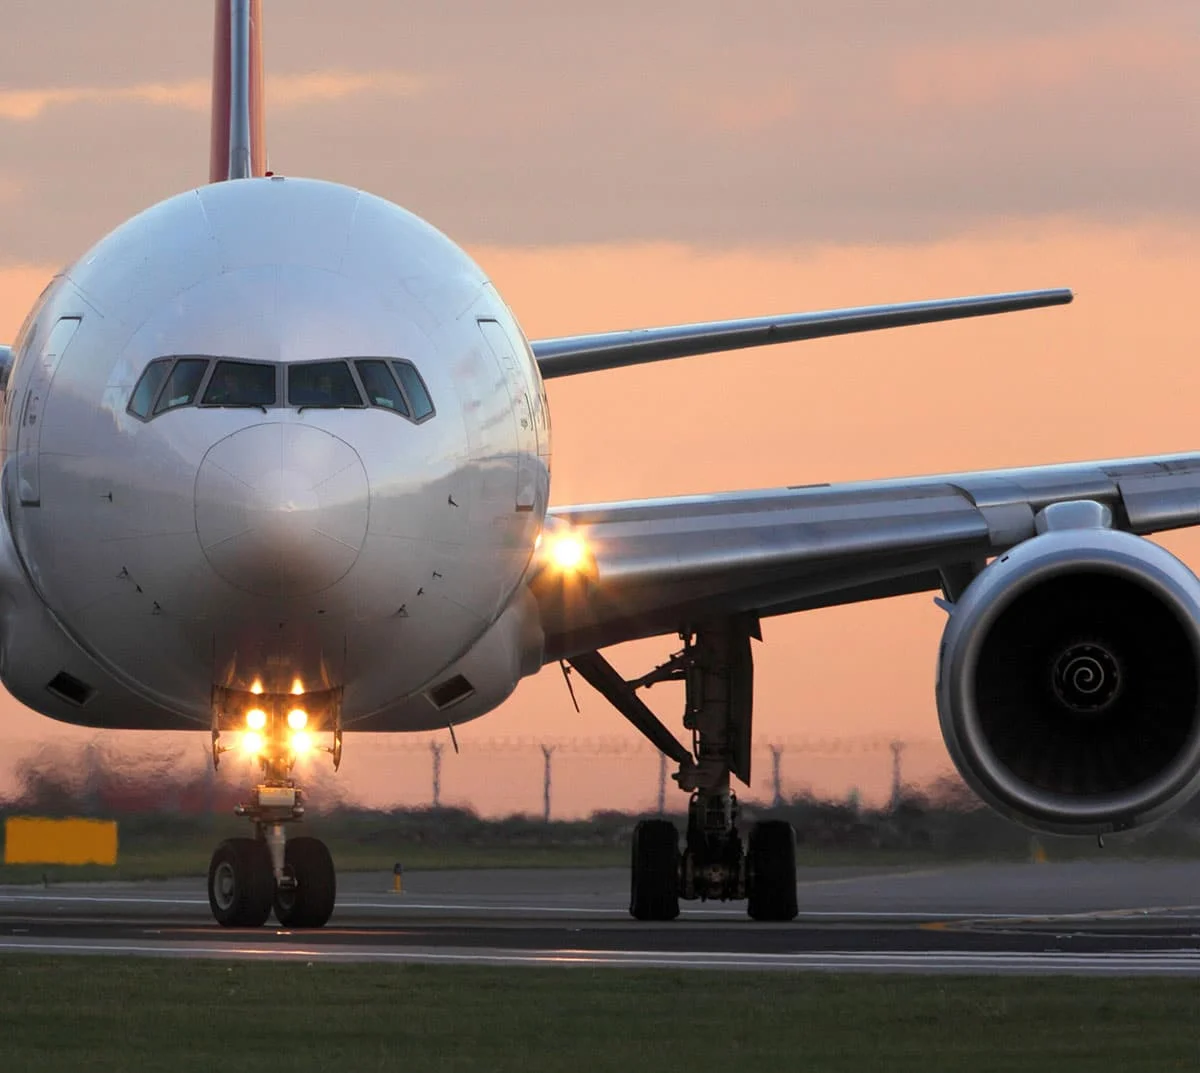 A Boeing 777 taxiing on the runway after landing at sunset